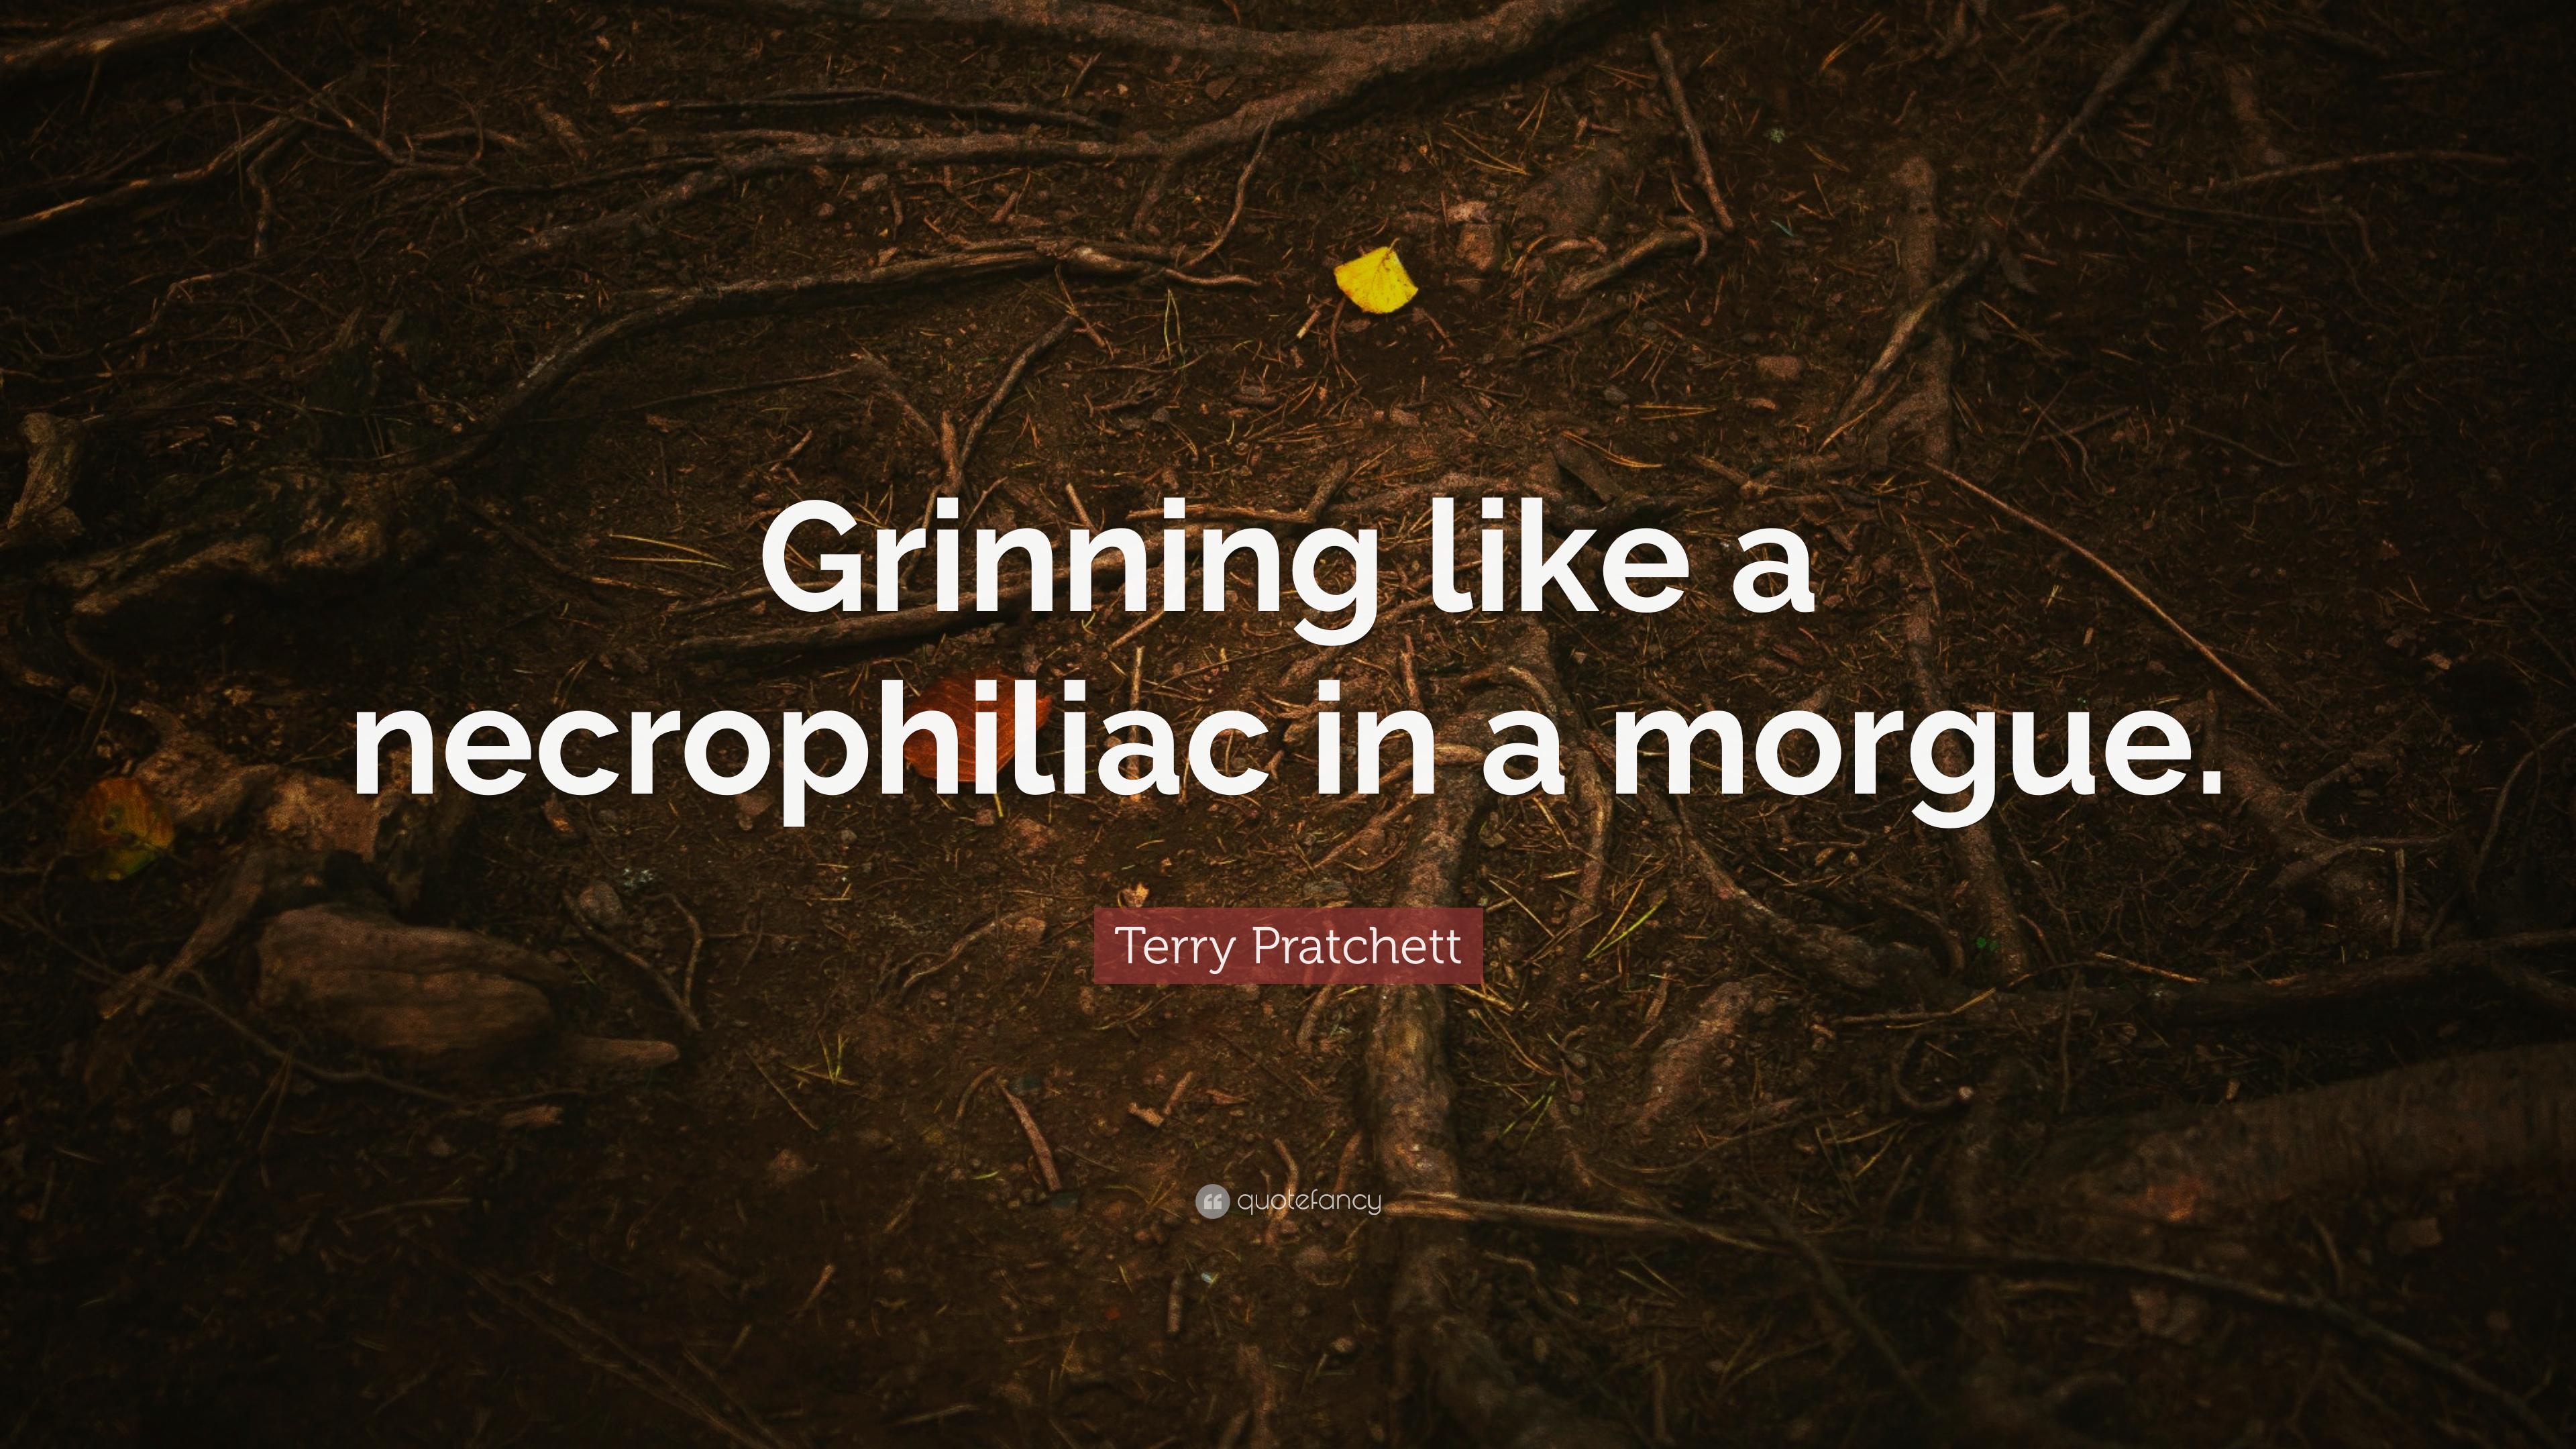 Terry Pratchett Quote: “Grinning like a necrophiliac in a morgue